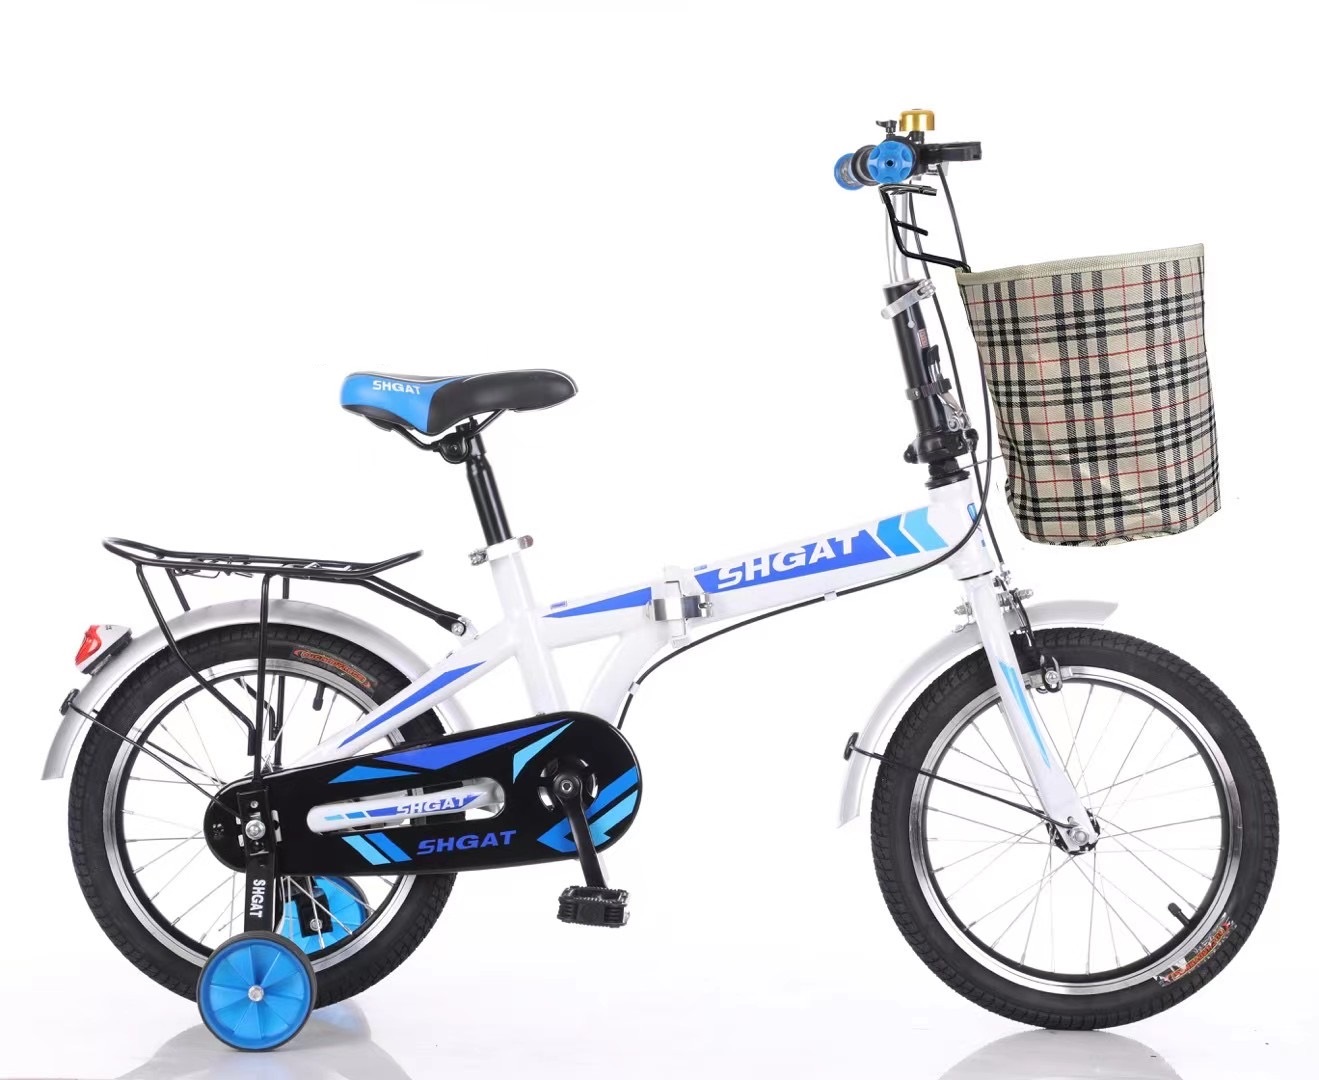 PriceList for Mens Folding Bike - 2021 New Style Folding Bicycle,popular color – Beimudou